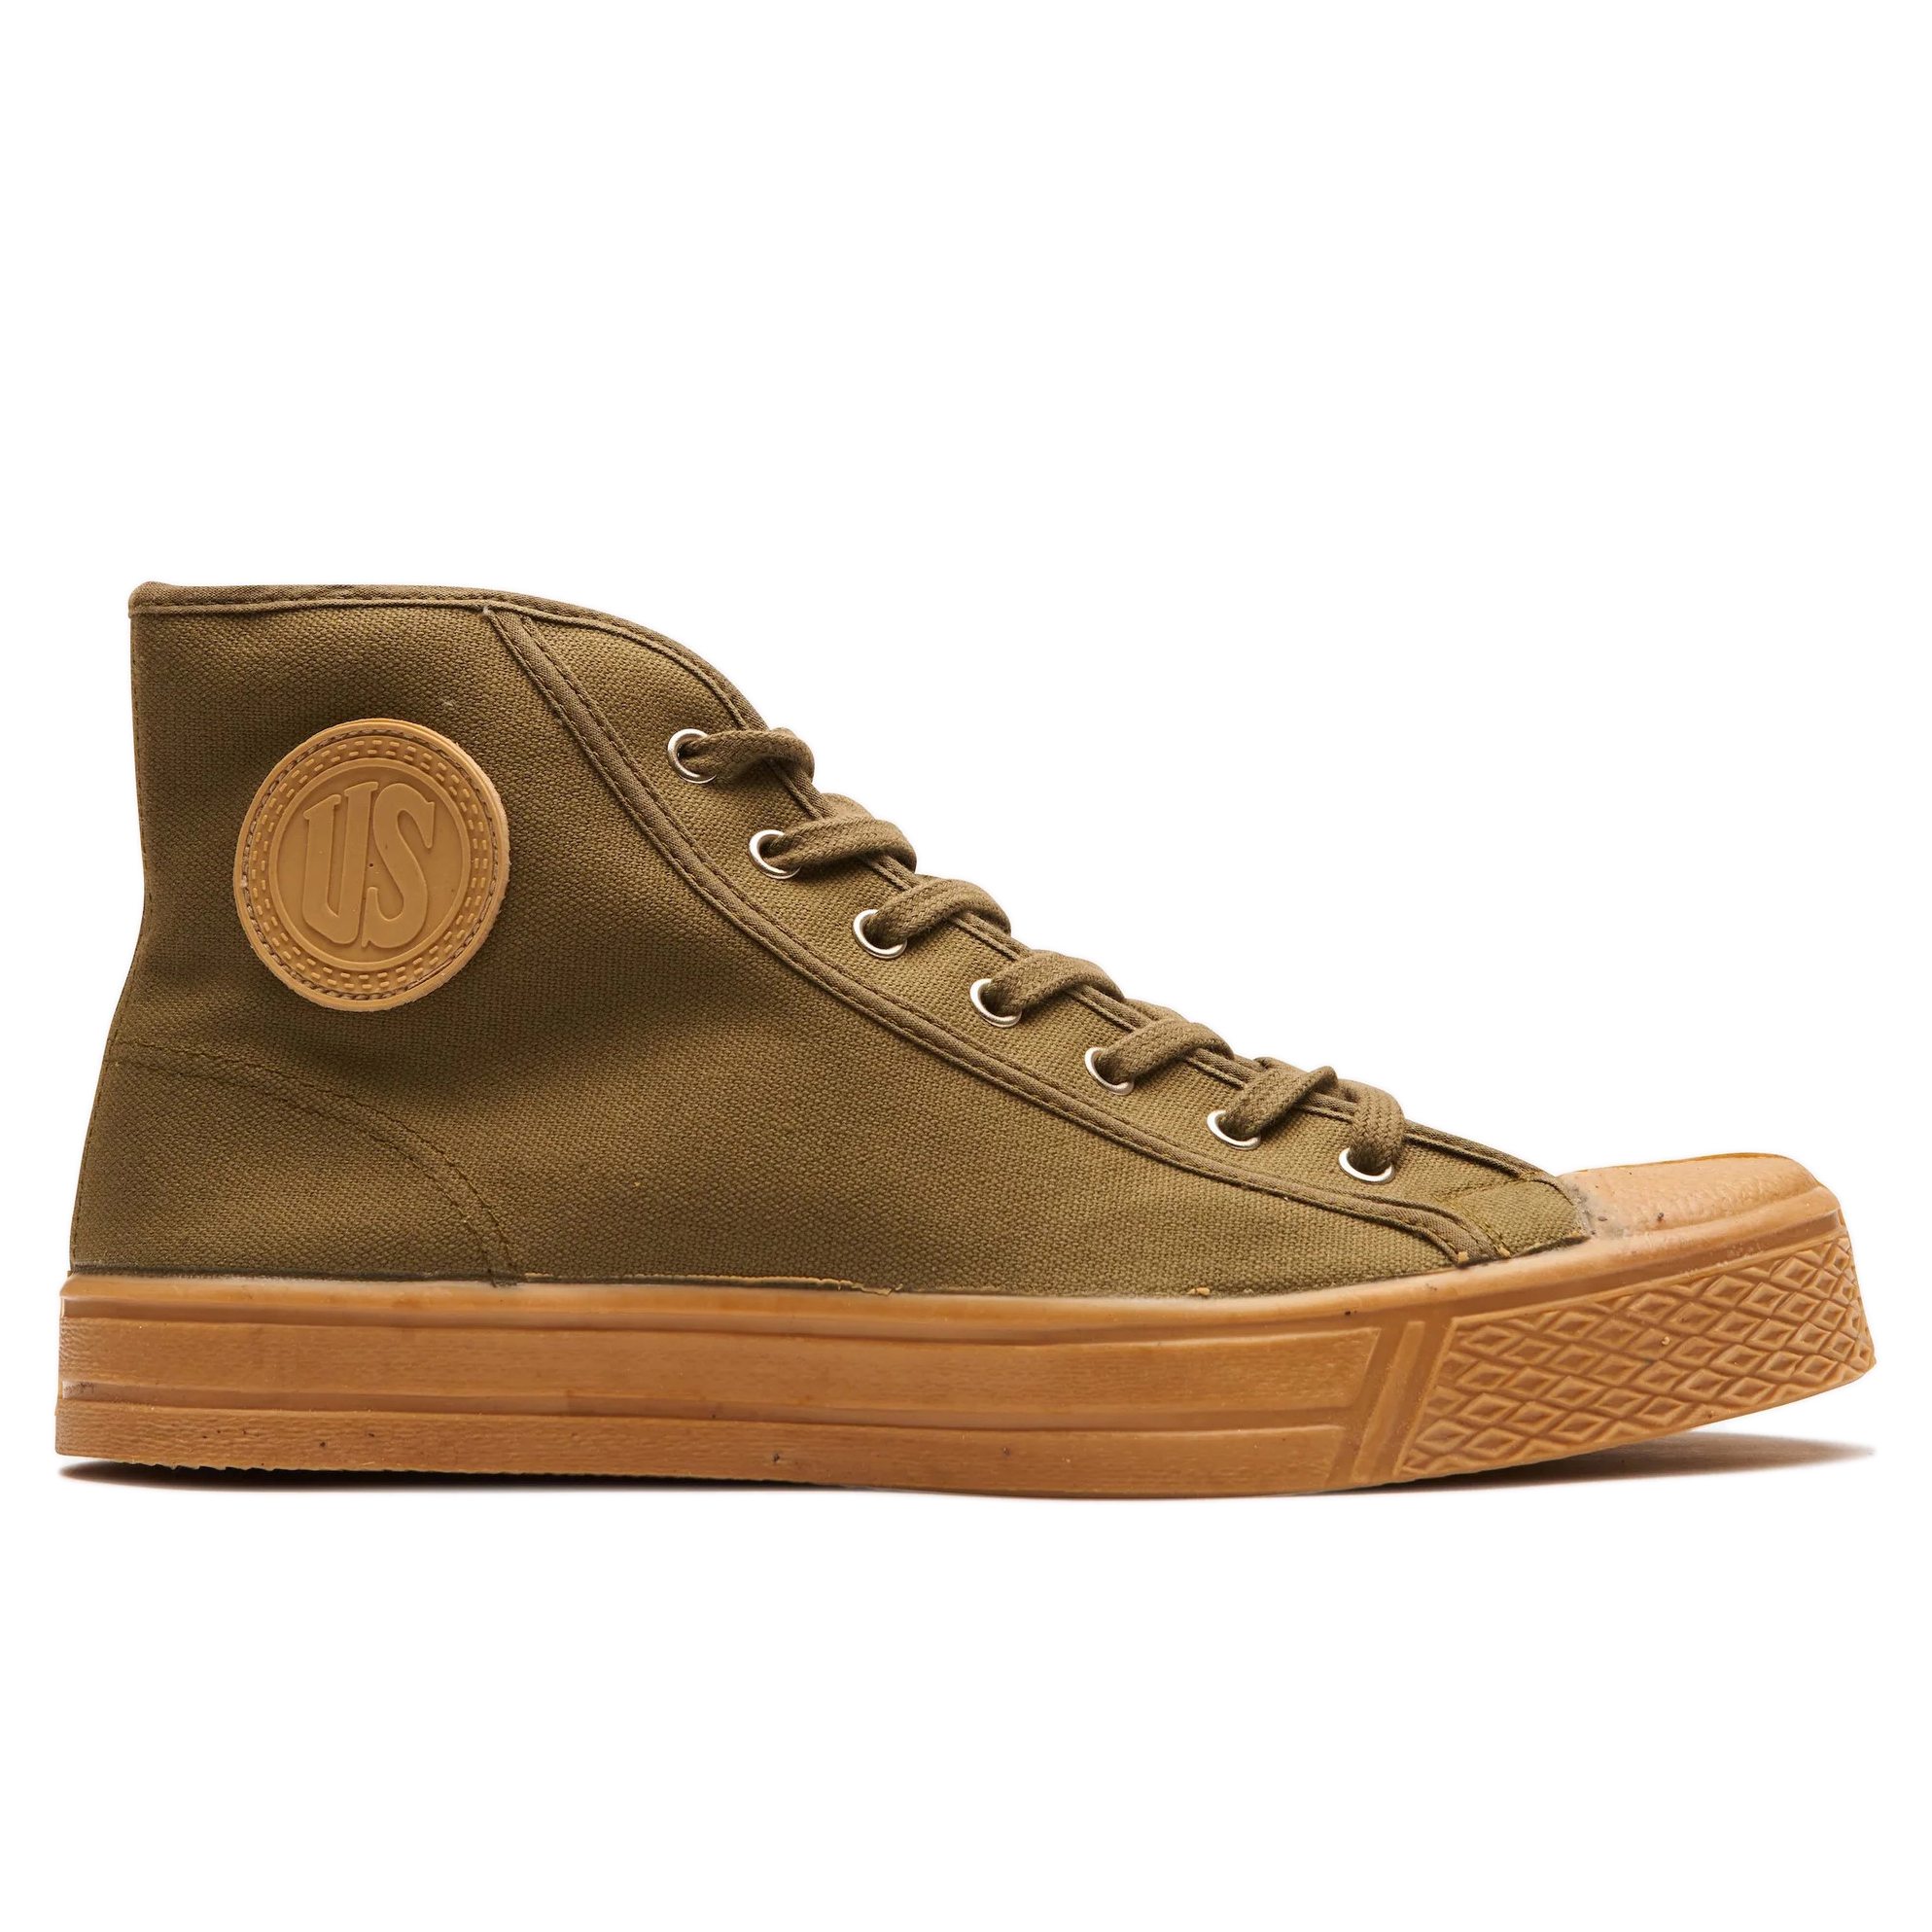 US Rubber CO. Military High Top Sneaker - Military Green/Gum